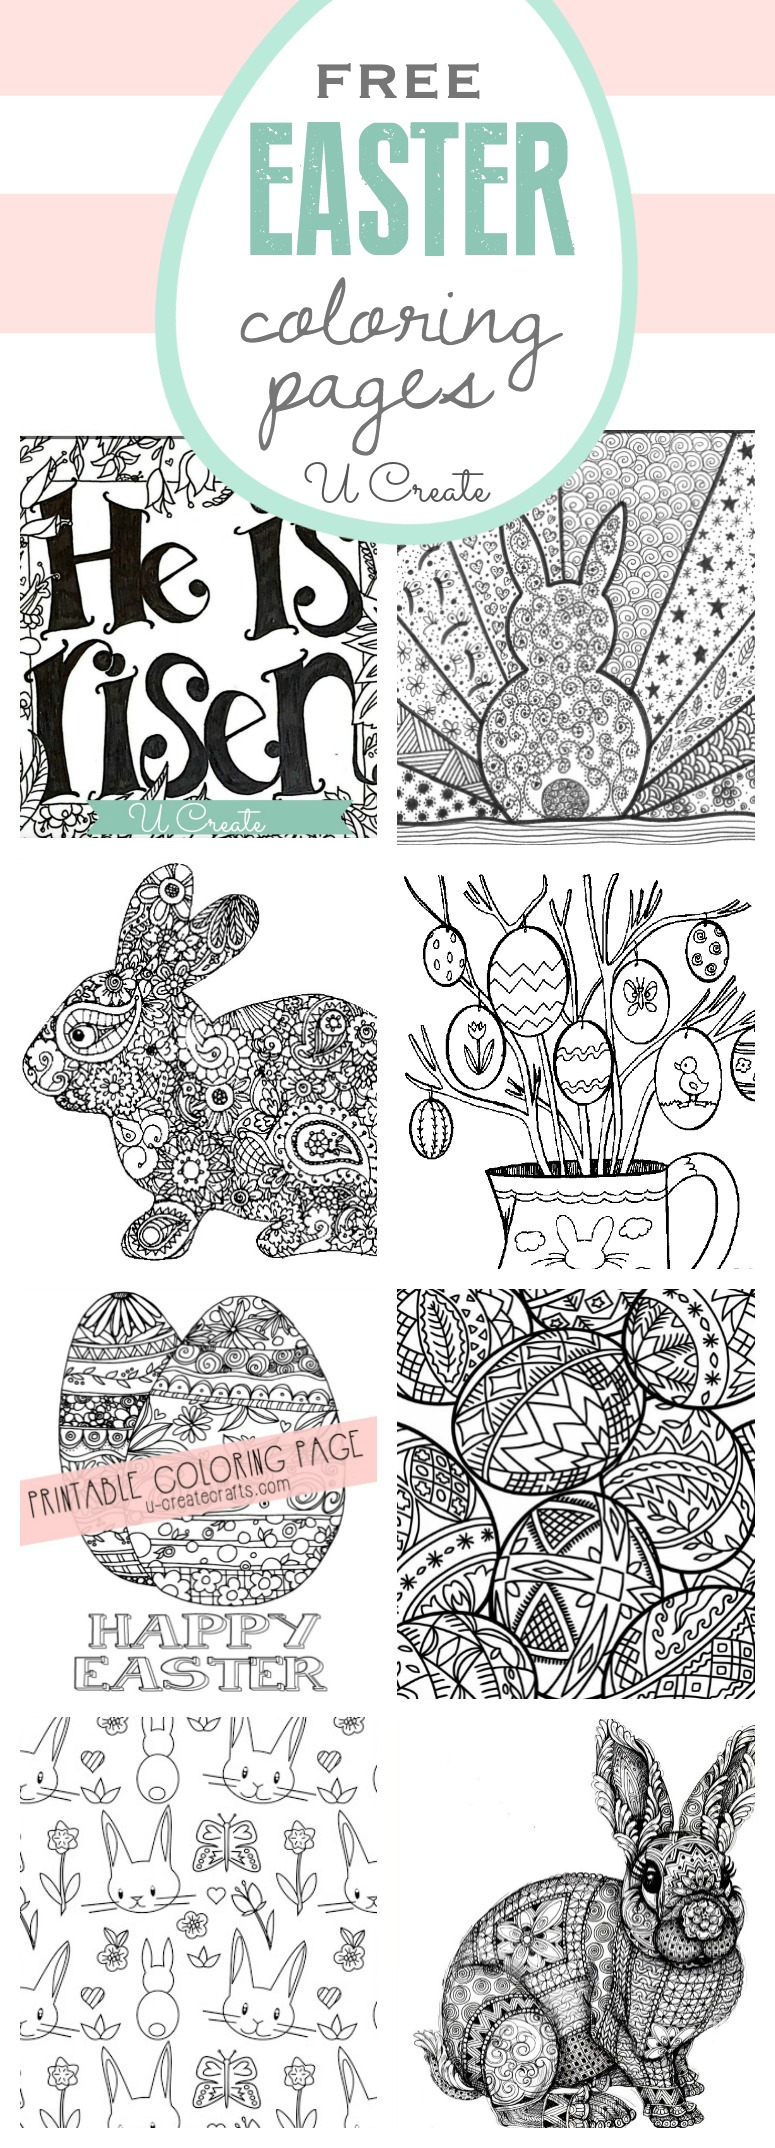 Free Easter Coloring Pages u-createcrafts.com